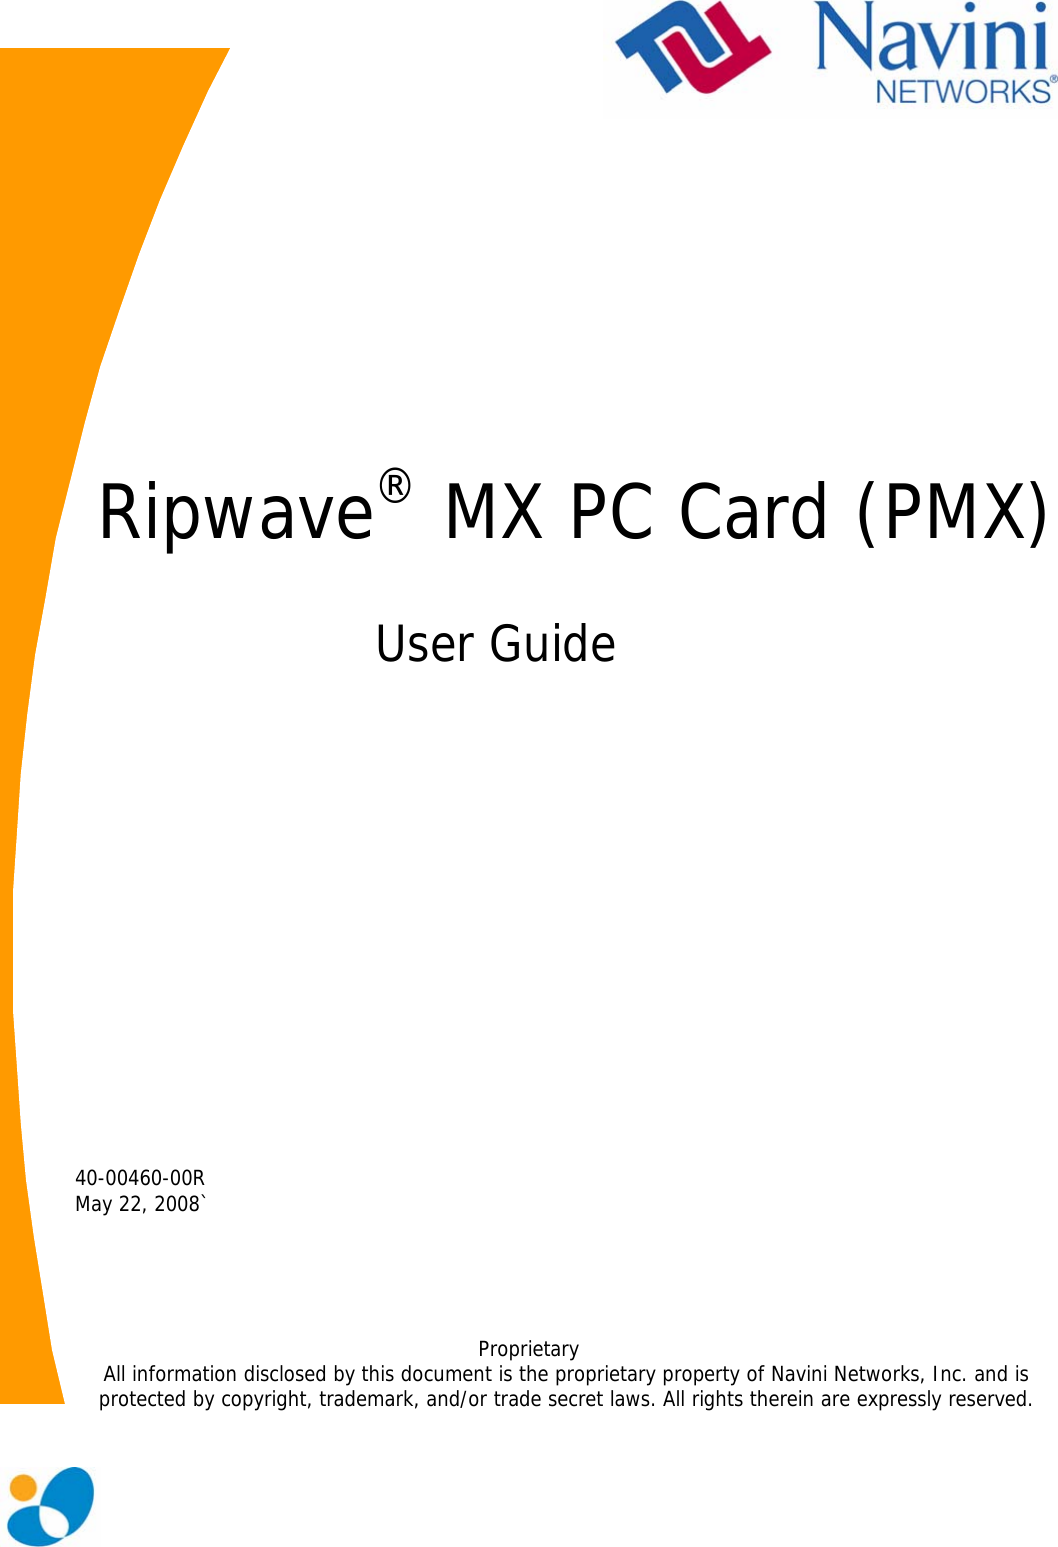                   Ripwave® MX PC Card (PMX)   User Guide                    40-00460-00R  May 22, 2008`      Proprietary All information disclosed by this document is the proprietary property of Navini Networks, Inc. and is protected by copyright, trademark, and/or trade secret laws. All rights therein are expressly reserved.  